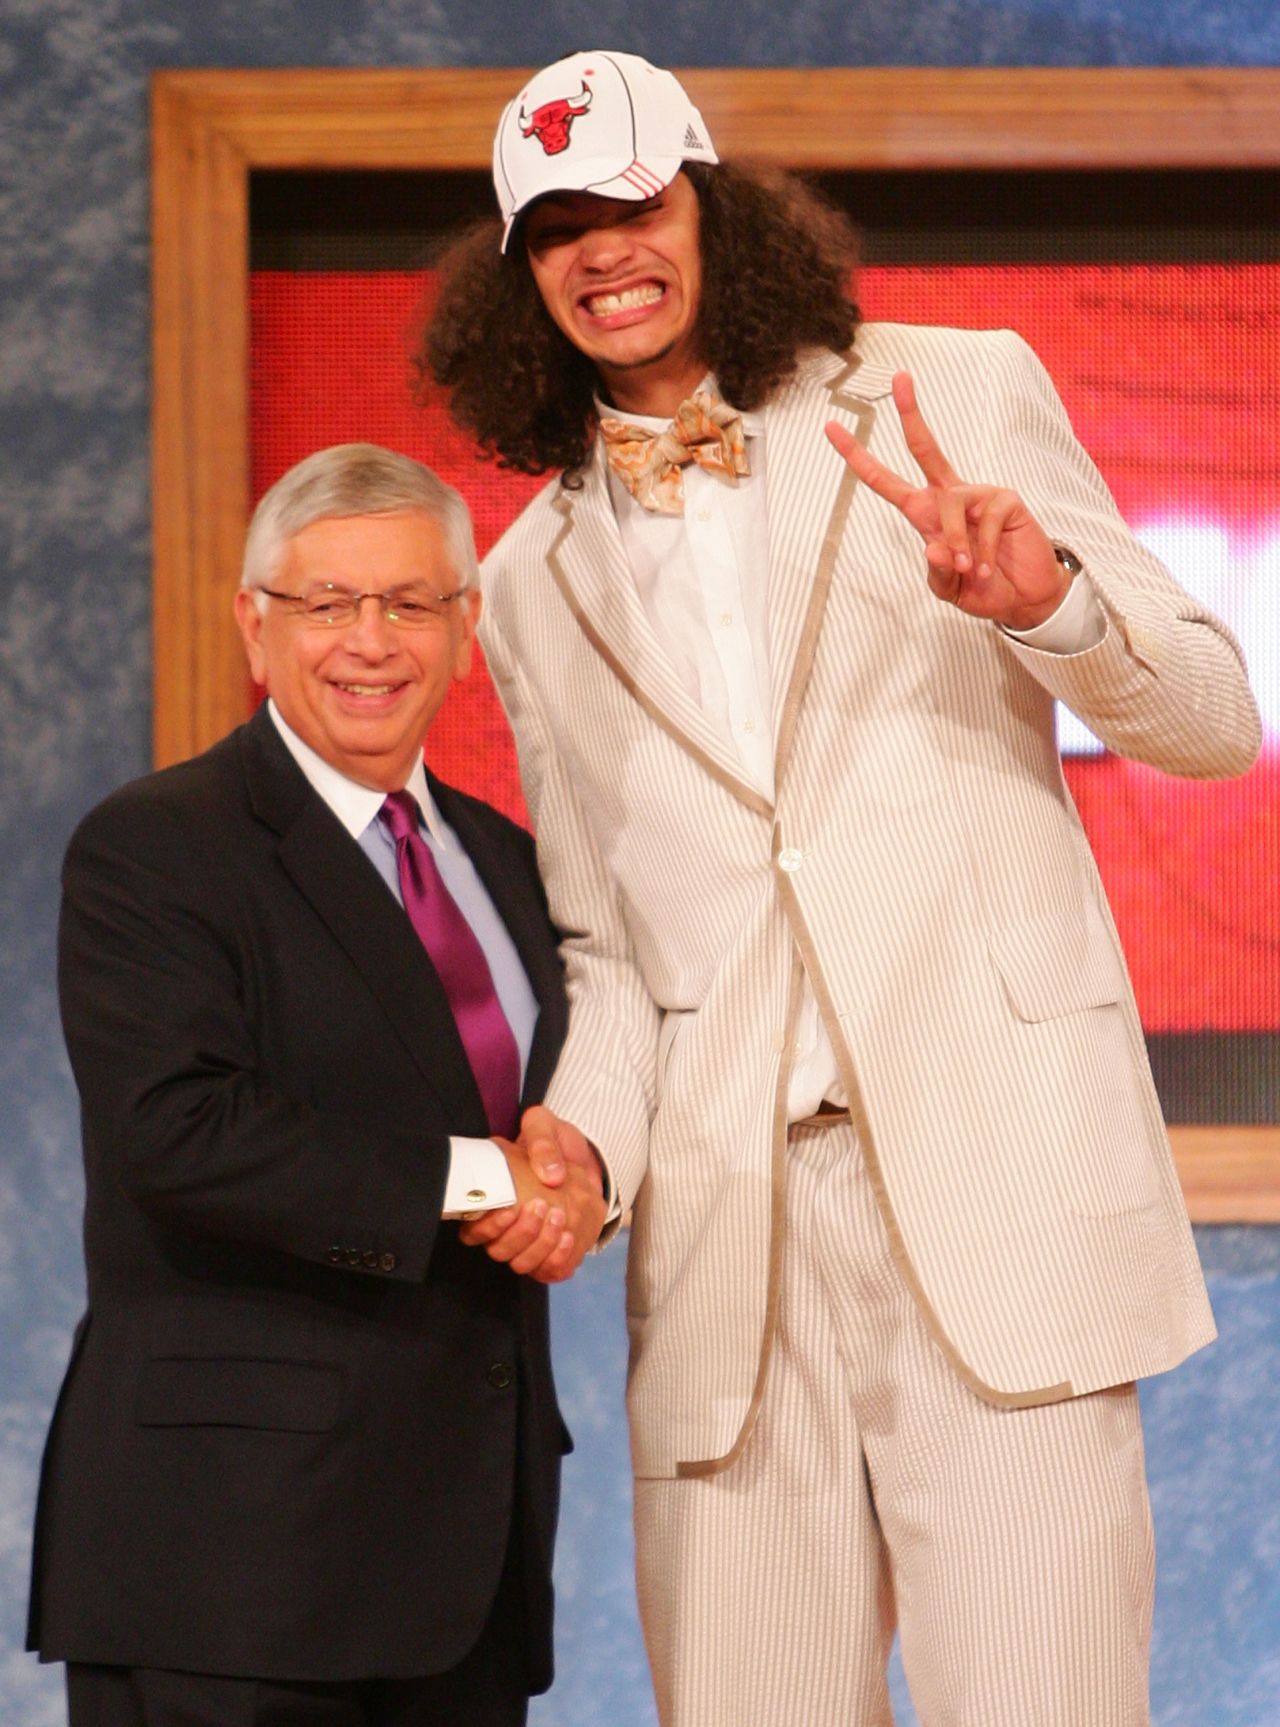 In 2007, the Bulls' Joakim Noah went all-out for the draft, as he posed with then NBA commissioner David Stern. "It's cool to be a little traditional, and that way they won't keep on showing your picture 20 years from now," says Chris Bosh of the Miami Heat. 